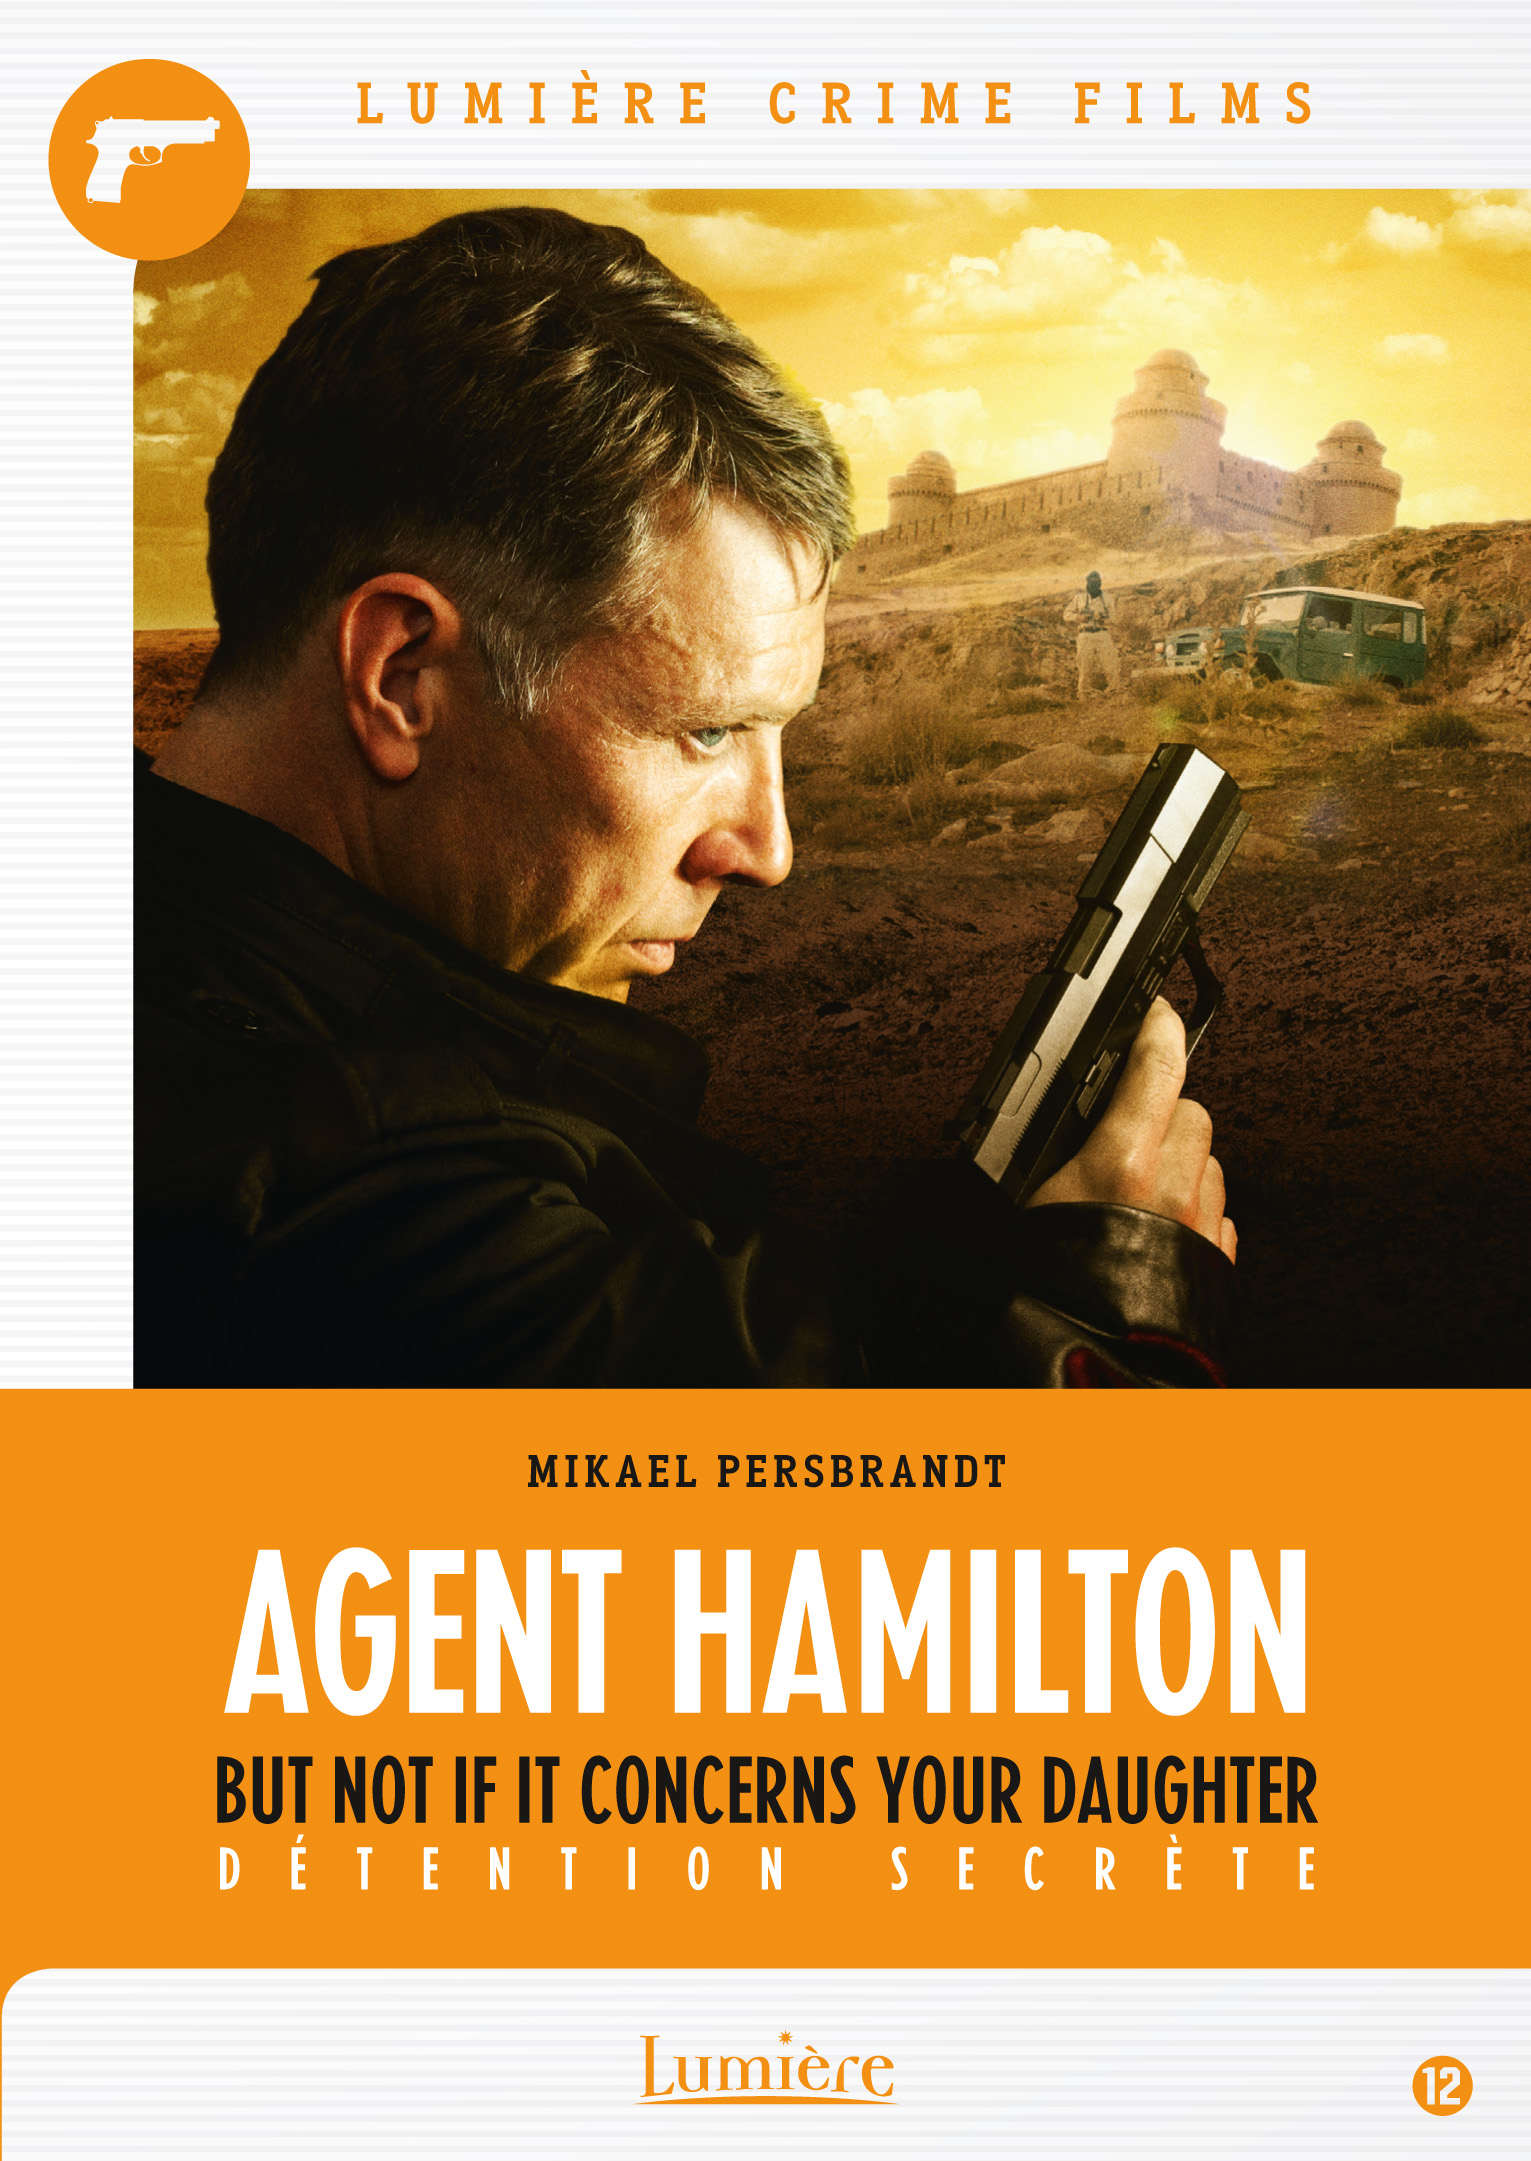 AGENT HAMILTON – But Not if it Concerns Your Daughter